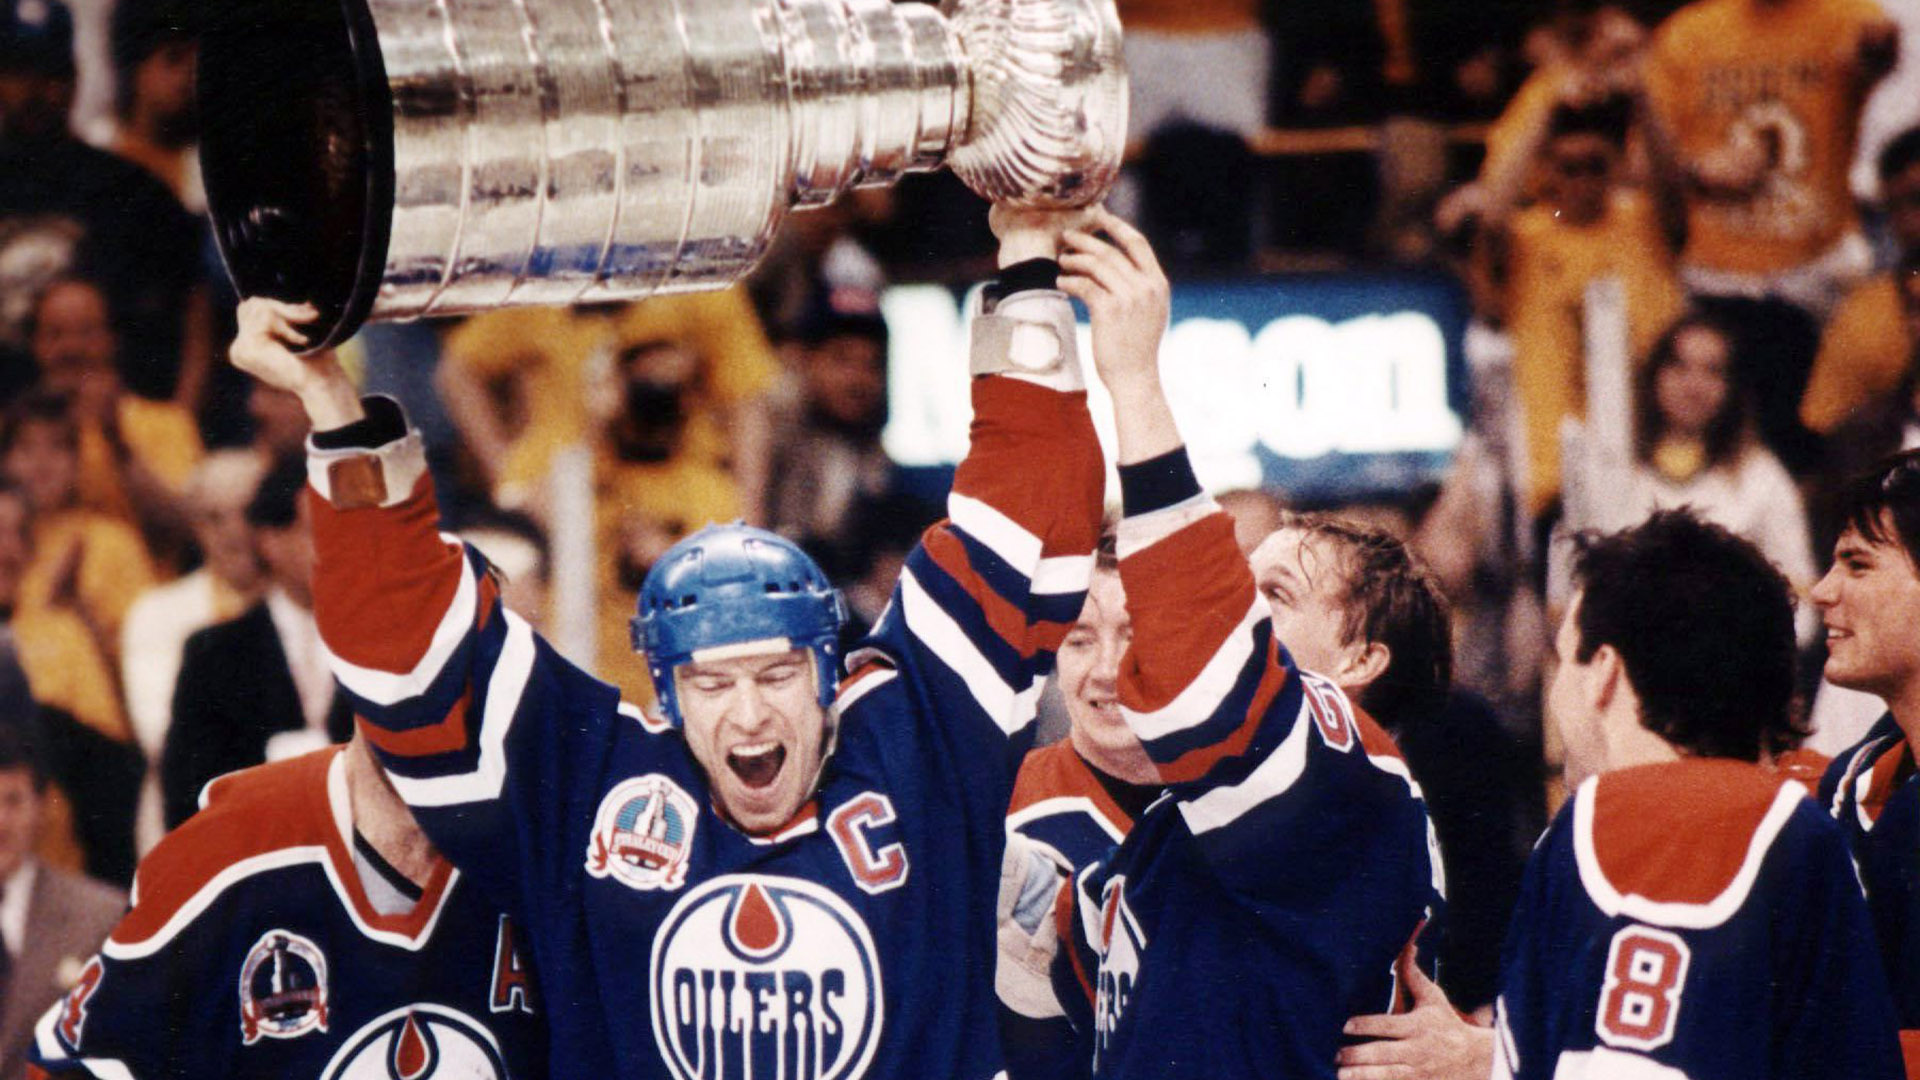 Iconic moment: 21 years ago today Sakic handed Stanley Cup to